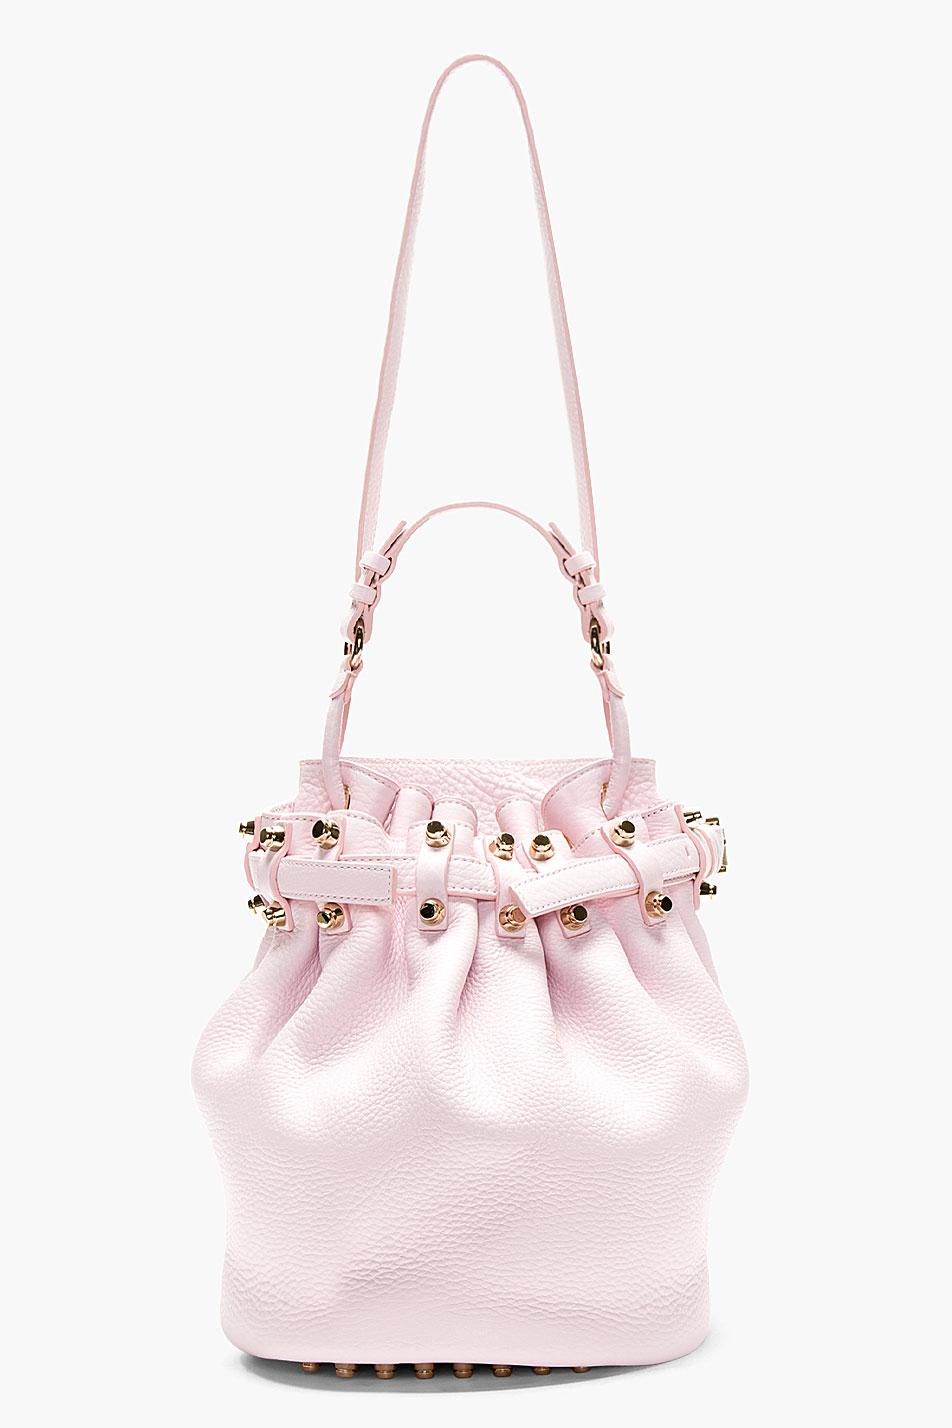 Lyst - Alexander wang Pastel Pink Leather and Gold Studded Diego Bucket ...